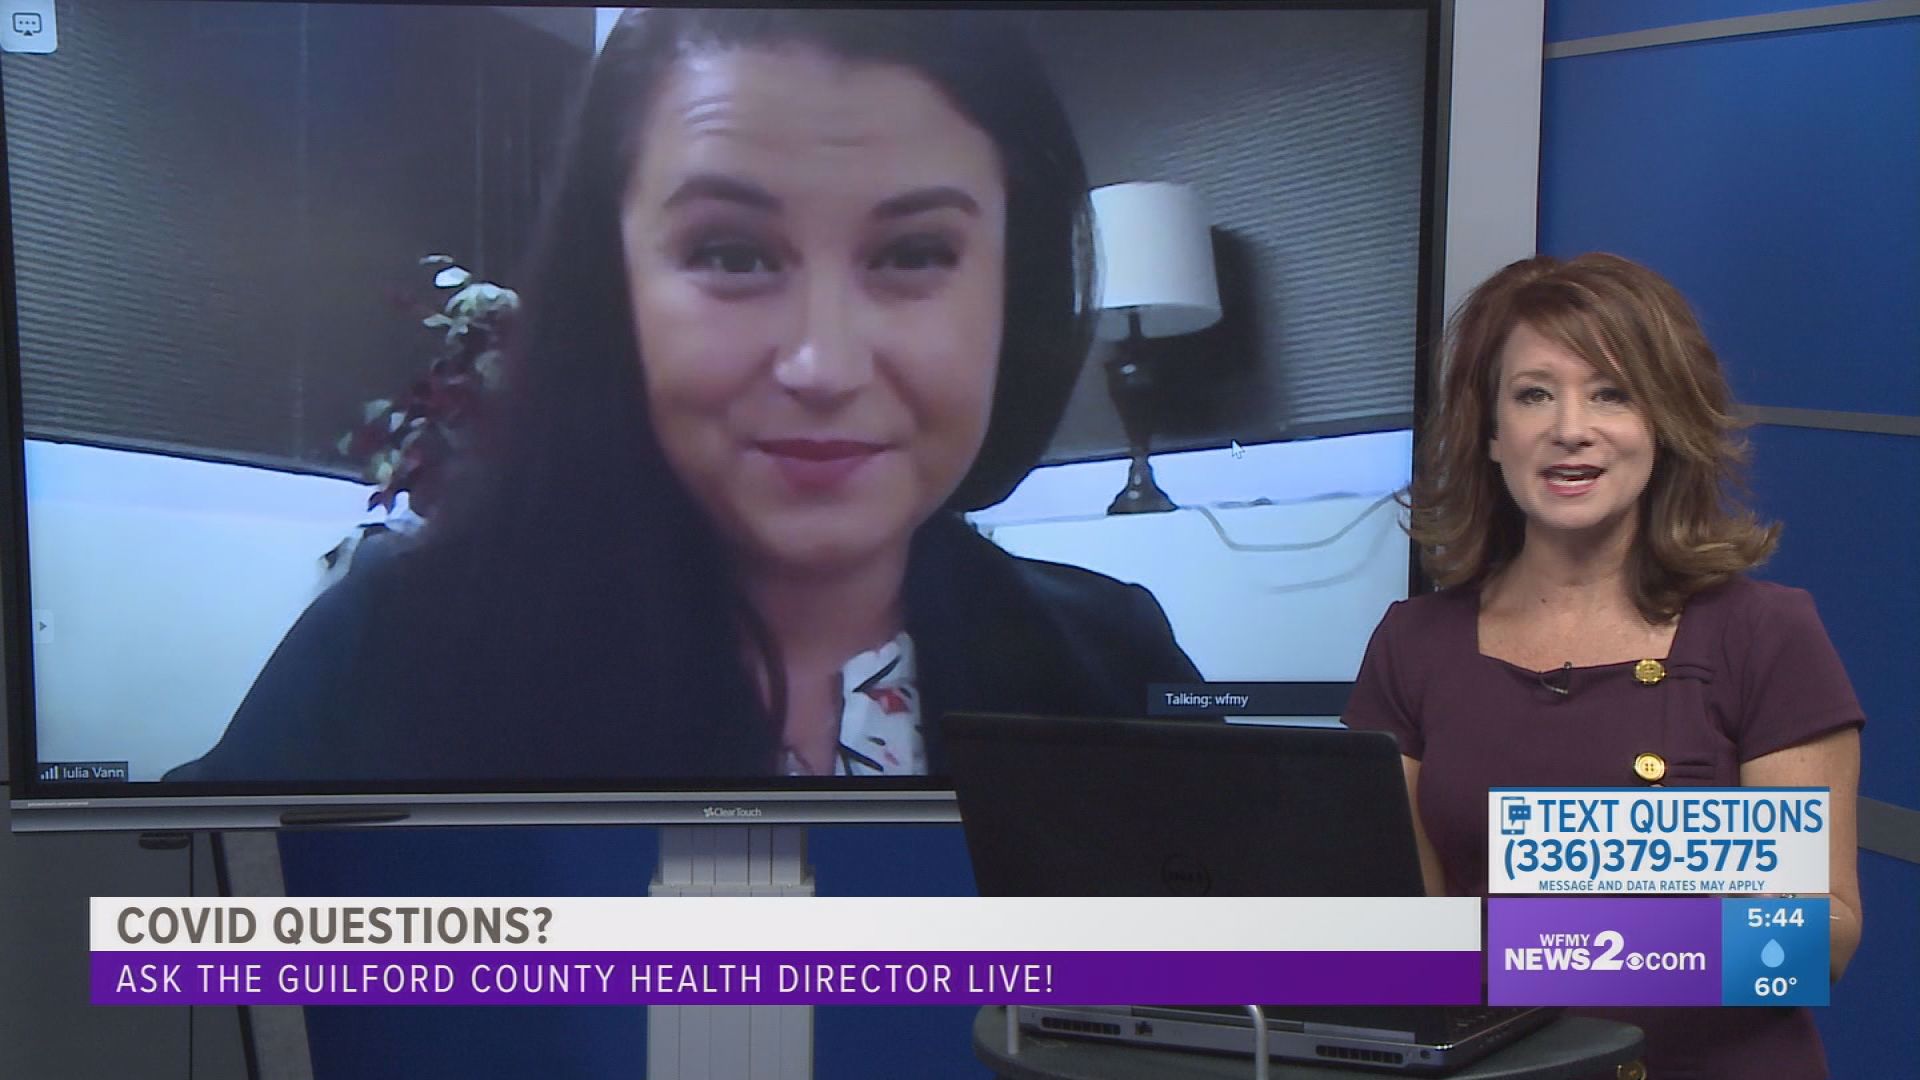 Dr. Iulia Vann answers questions about how the health department is handling coronavirus.